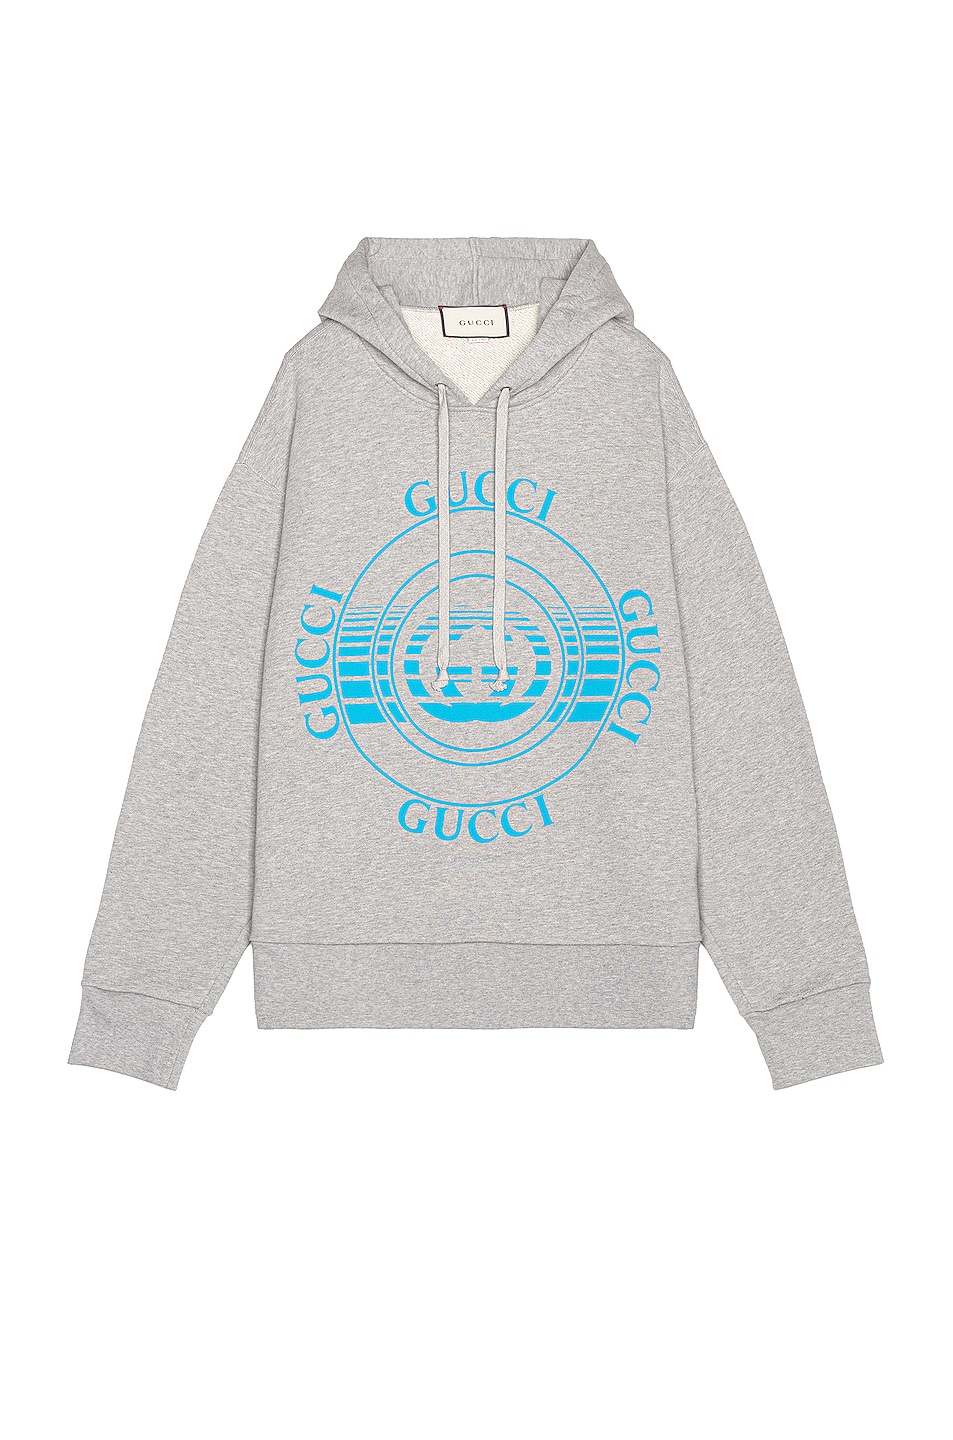 Image 1 of Gucci Cotton Jersey Hoodie in Medium Grey & Cobalt in Medium Grey & Cobalt